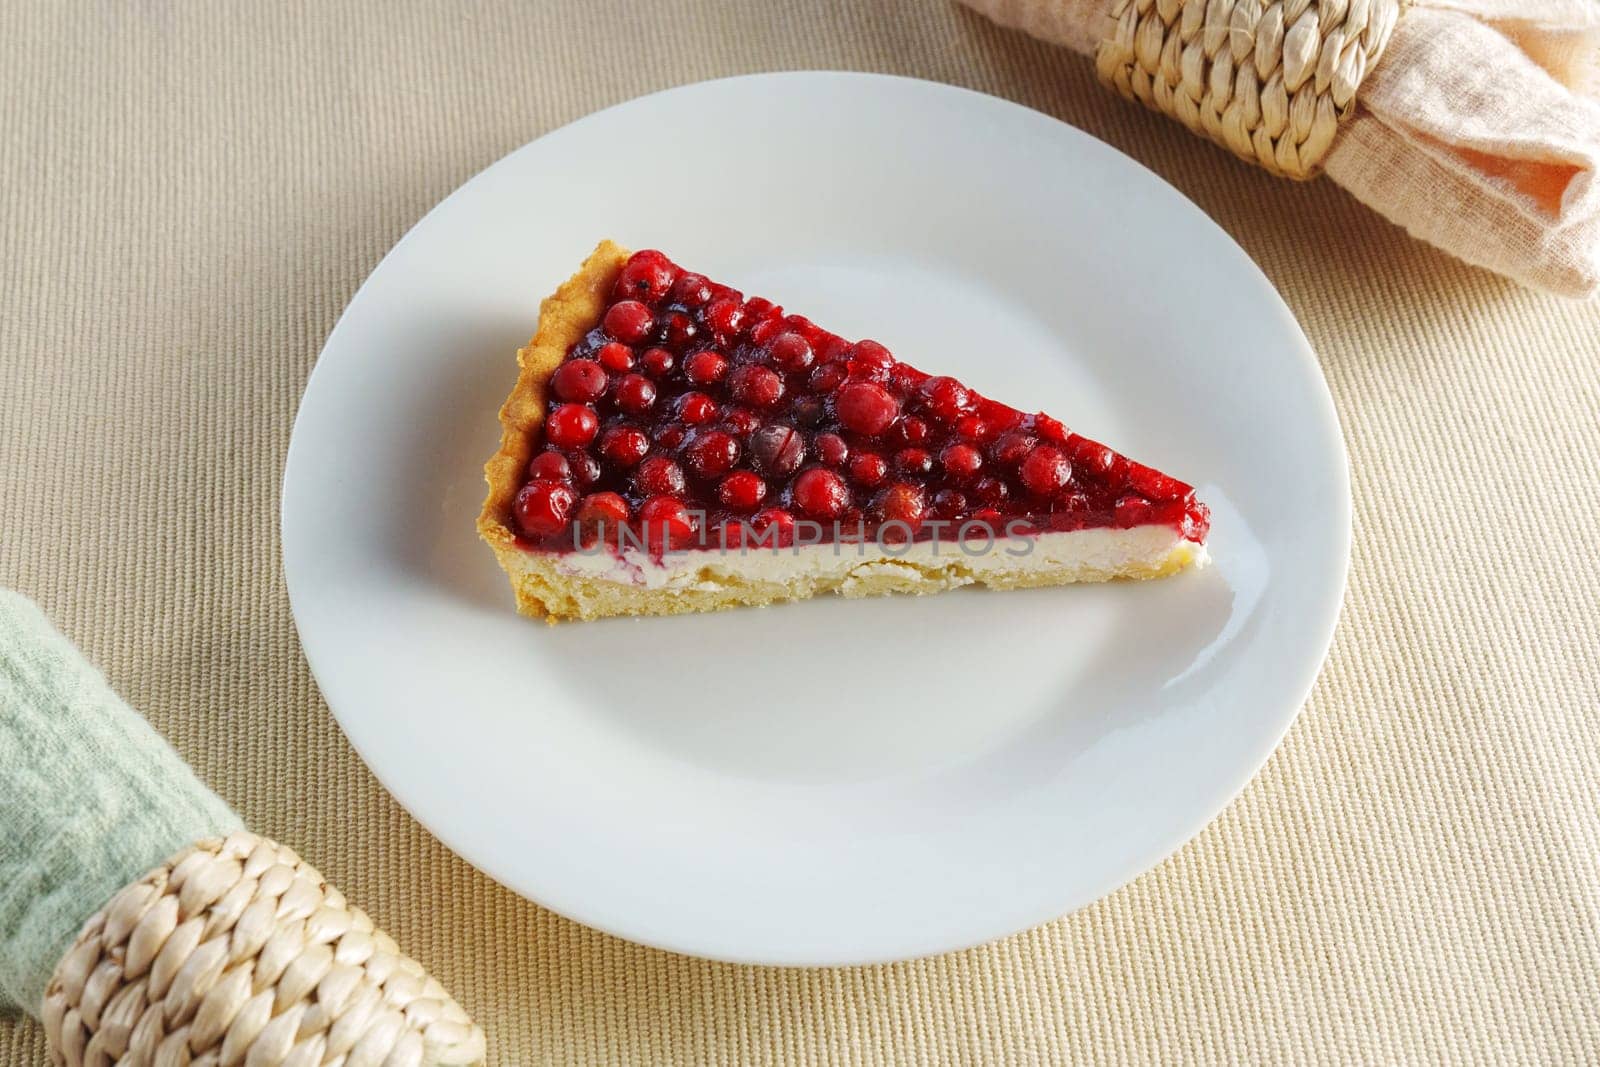 Beauty of a scrumptious slice of pie, gracefully perched on a charming antique plate atop a rustic table.